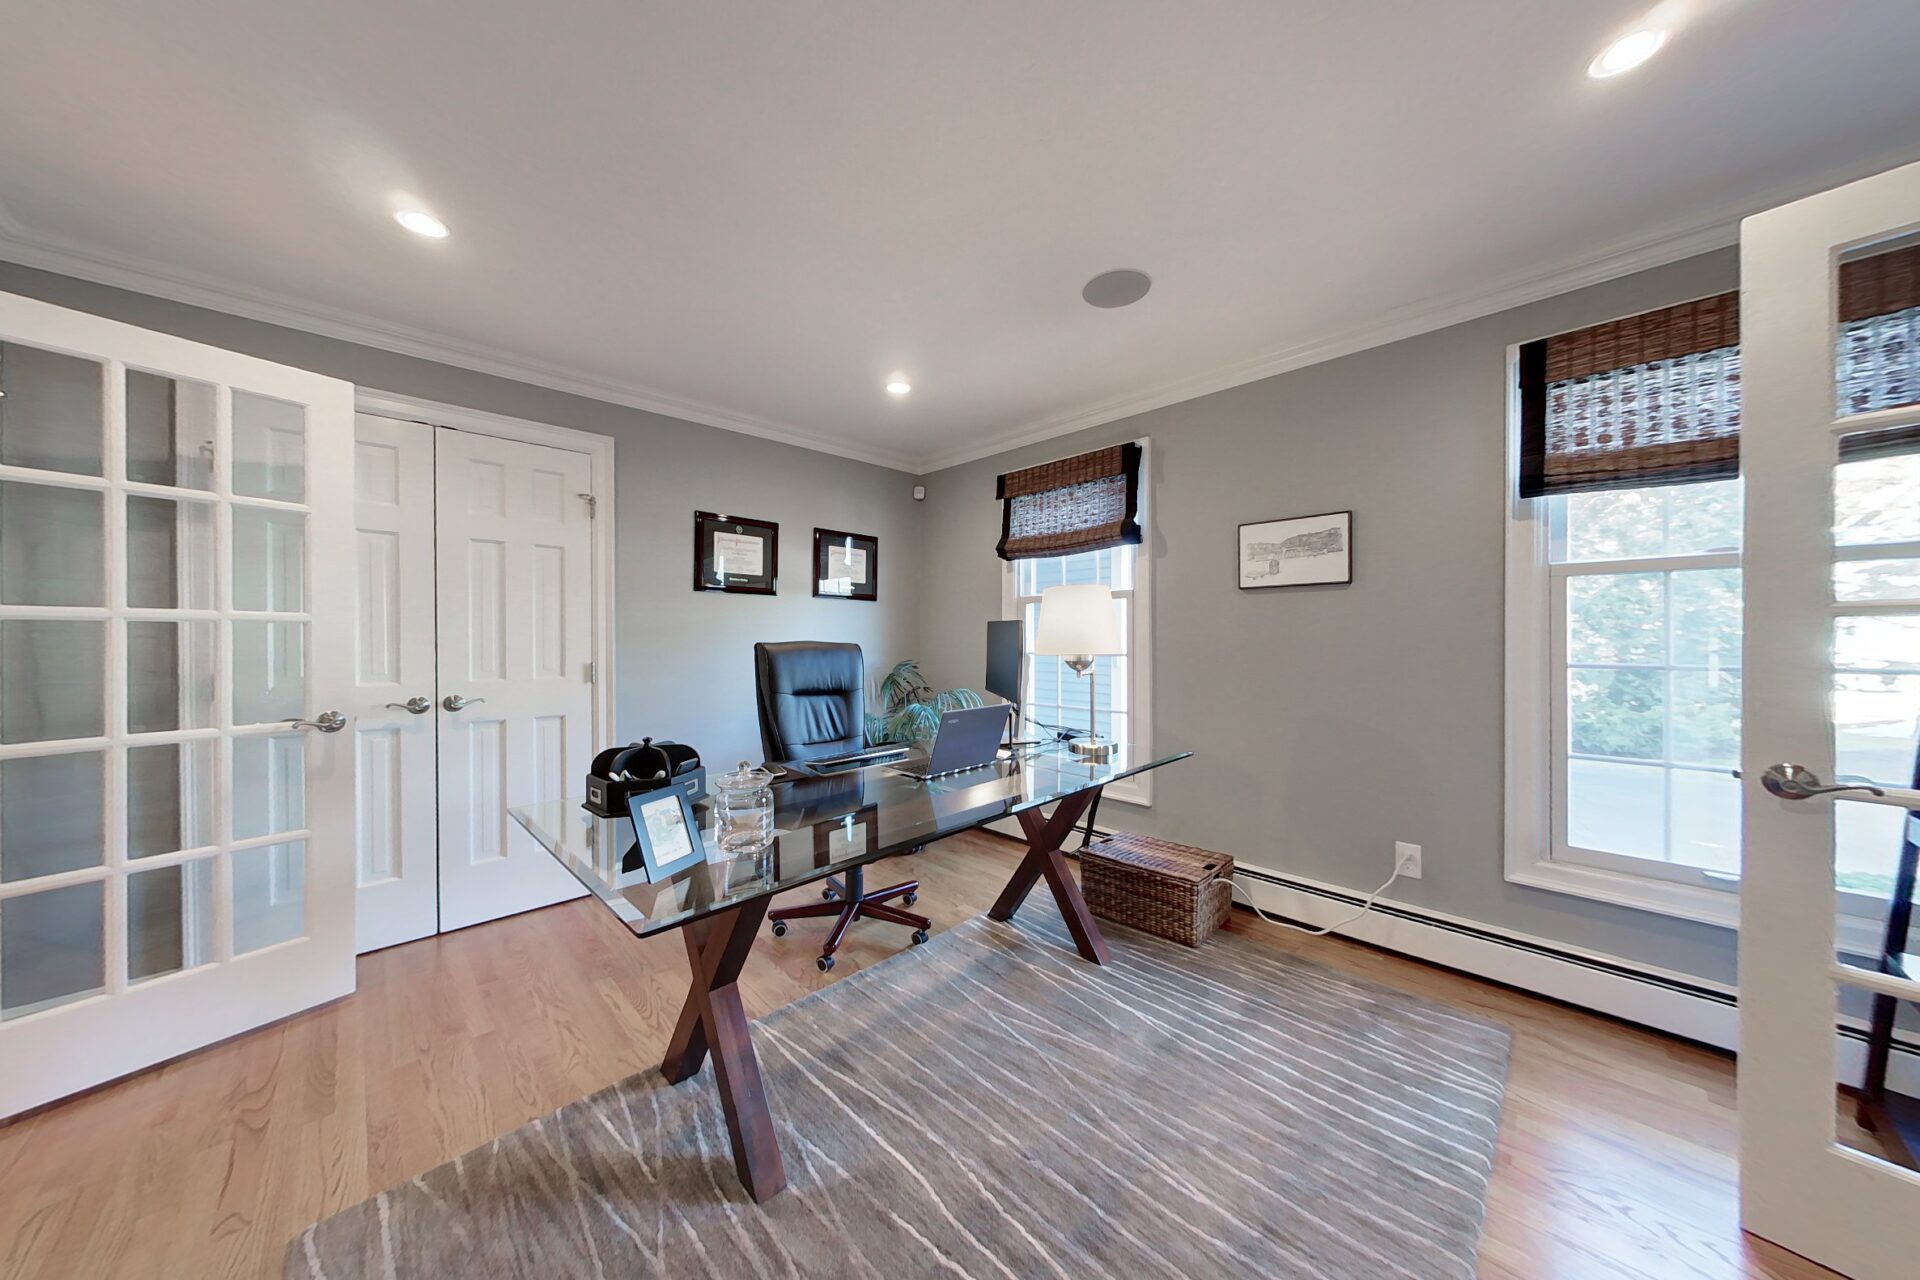 Image of the home office in a 2-story colonial style home in North Attleboro, MA.